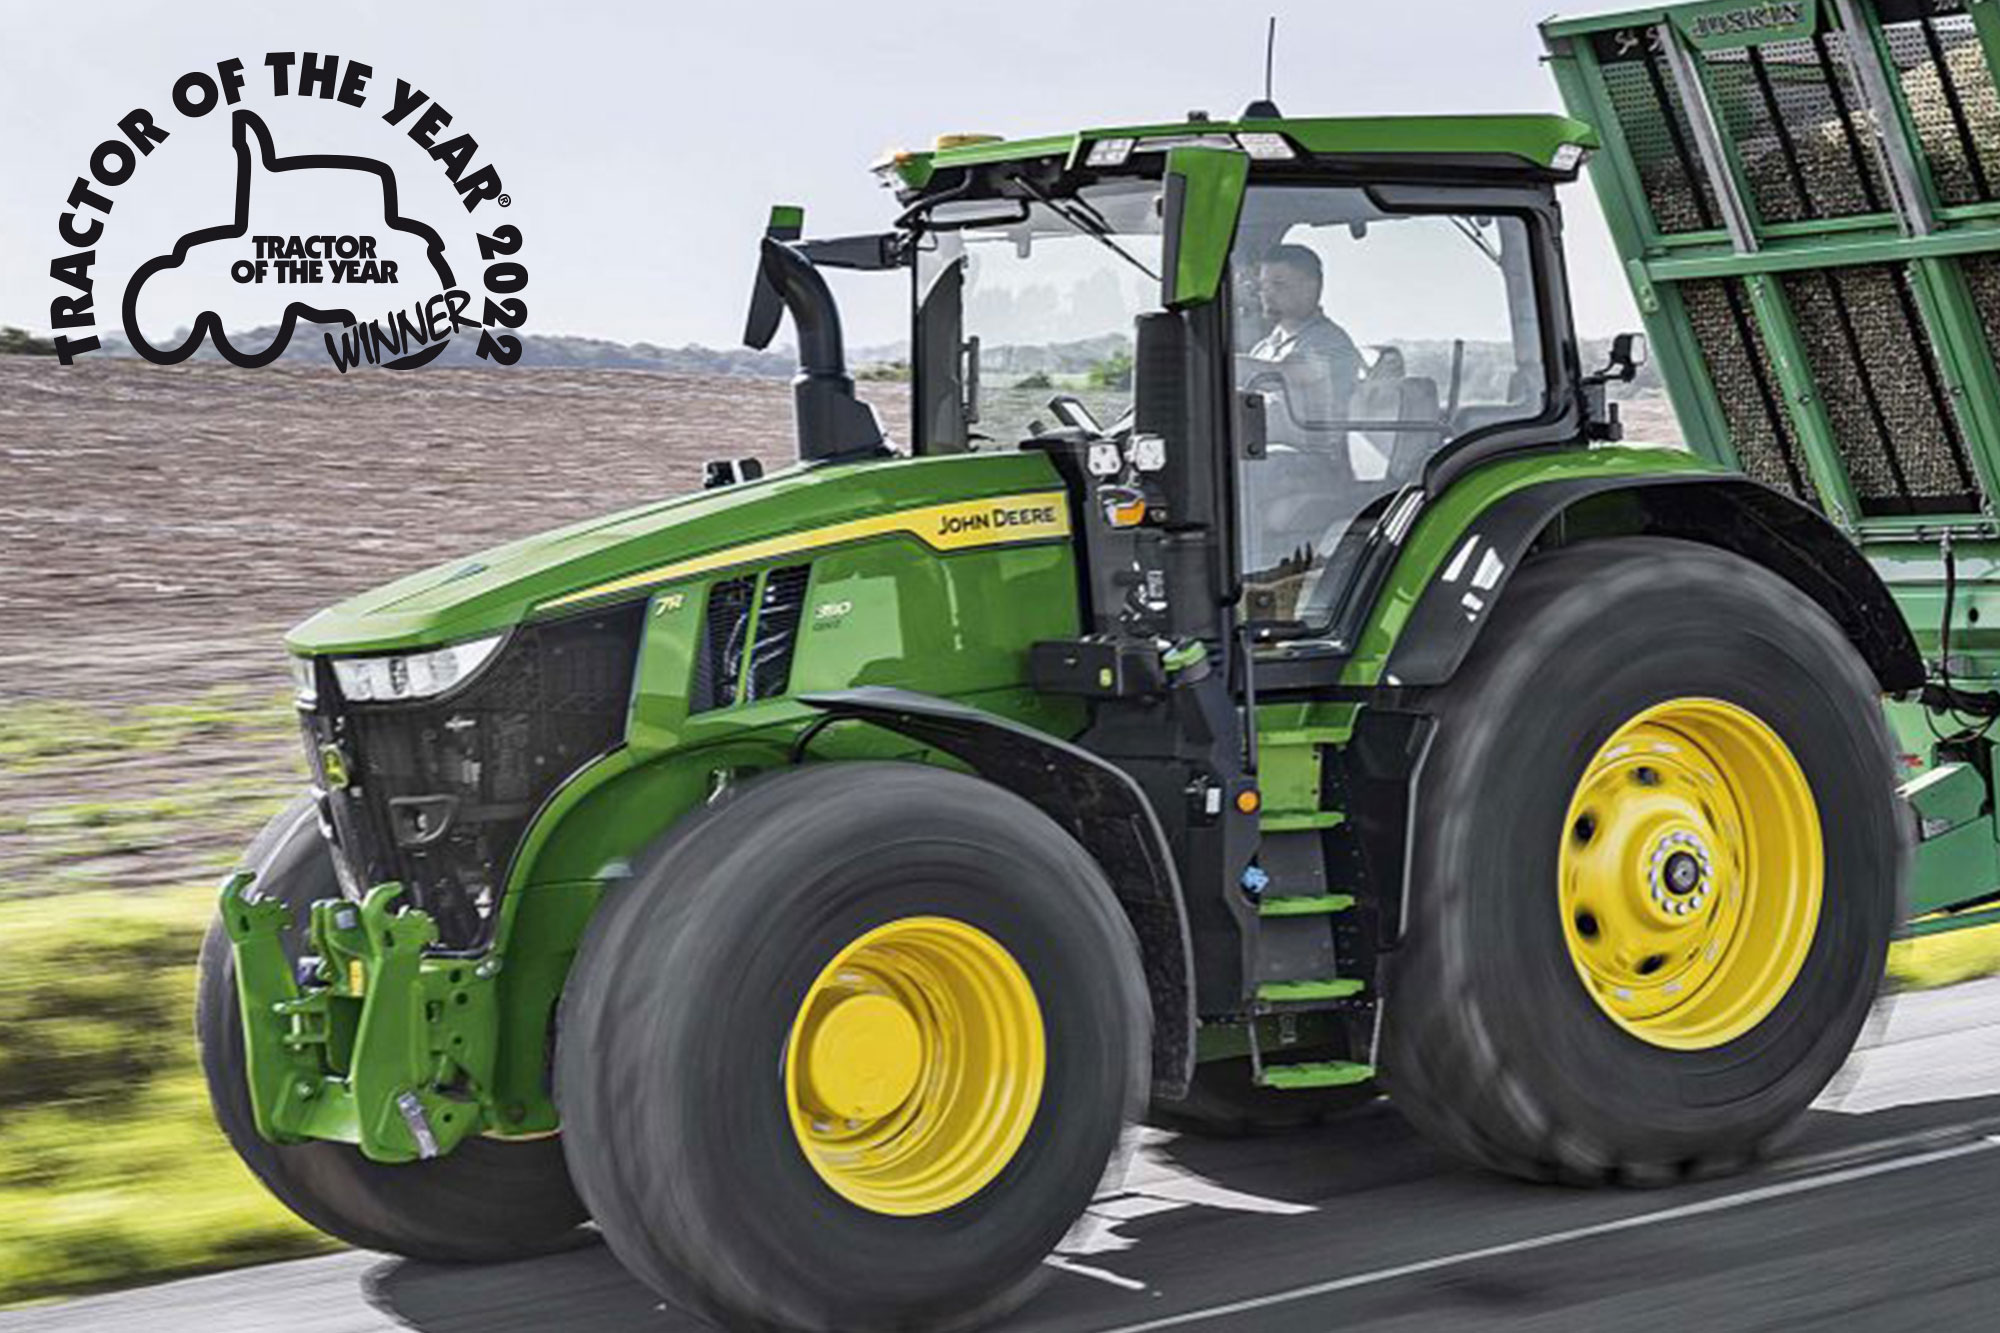 Detail Images Of Tractors Nomer 55